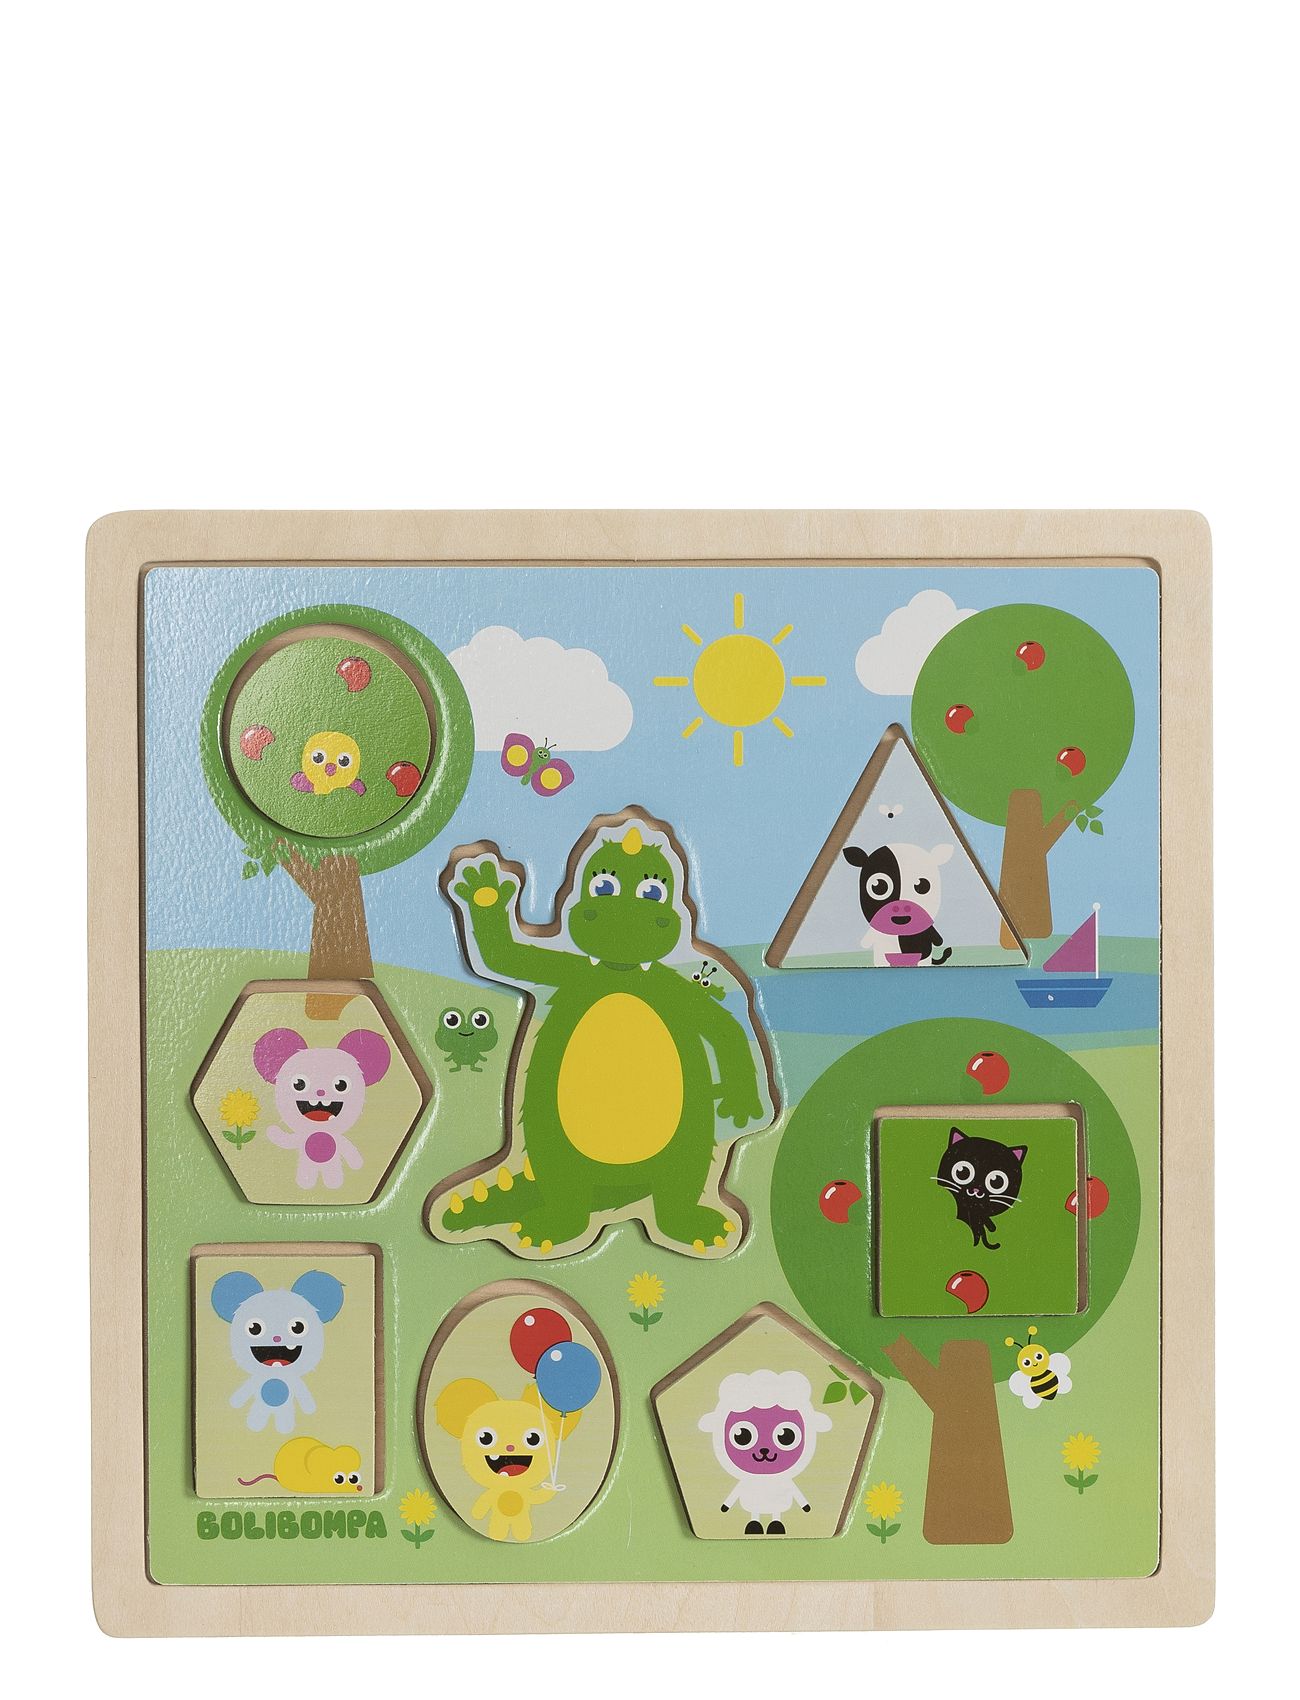 Bolibompa, 2I1 Sommar&Vinter Pussel Toys Puzzles And Games Puzzles Wooden Puzzles Multi/patterned Bolibompa